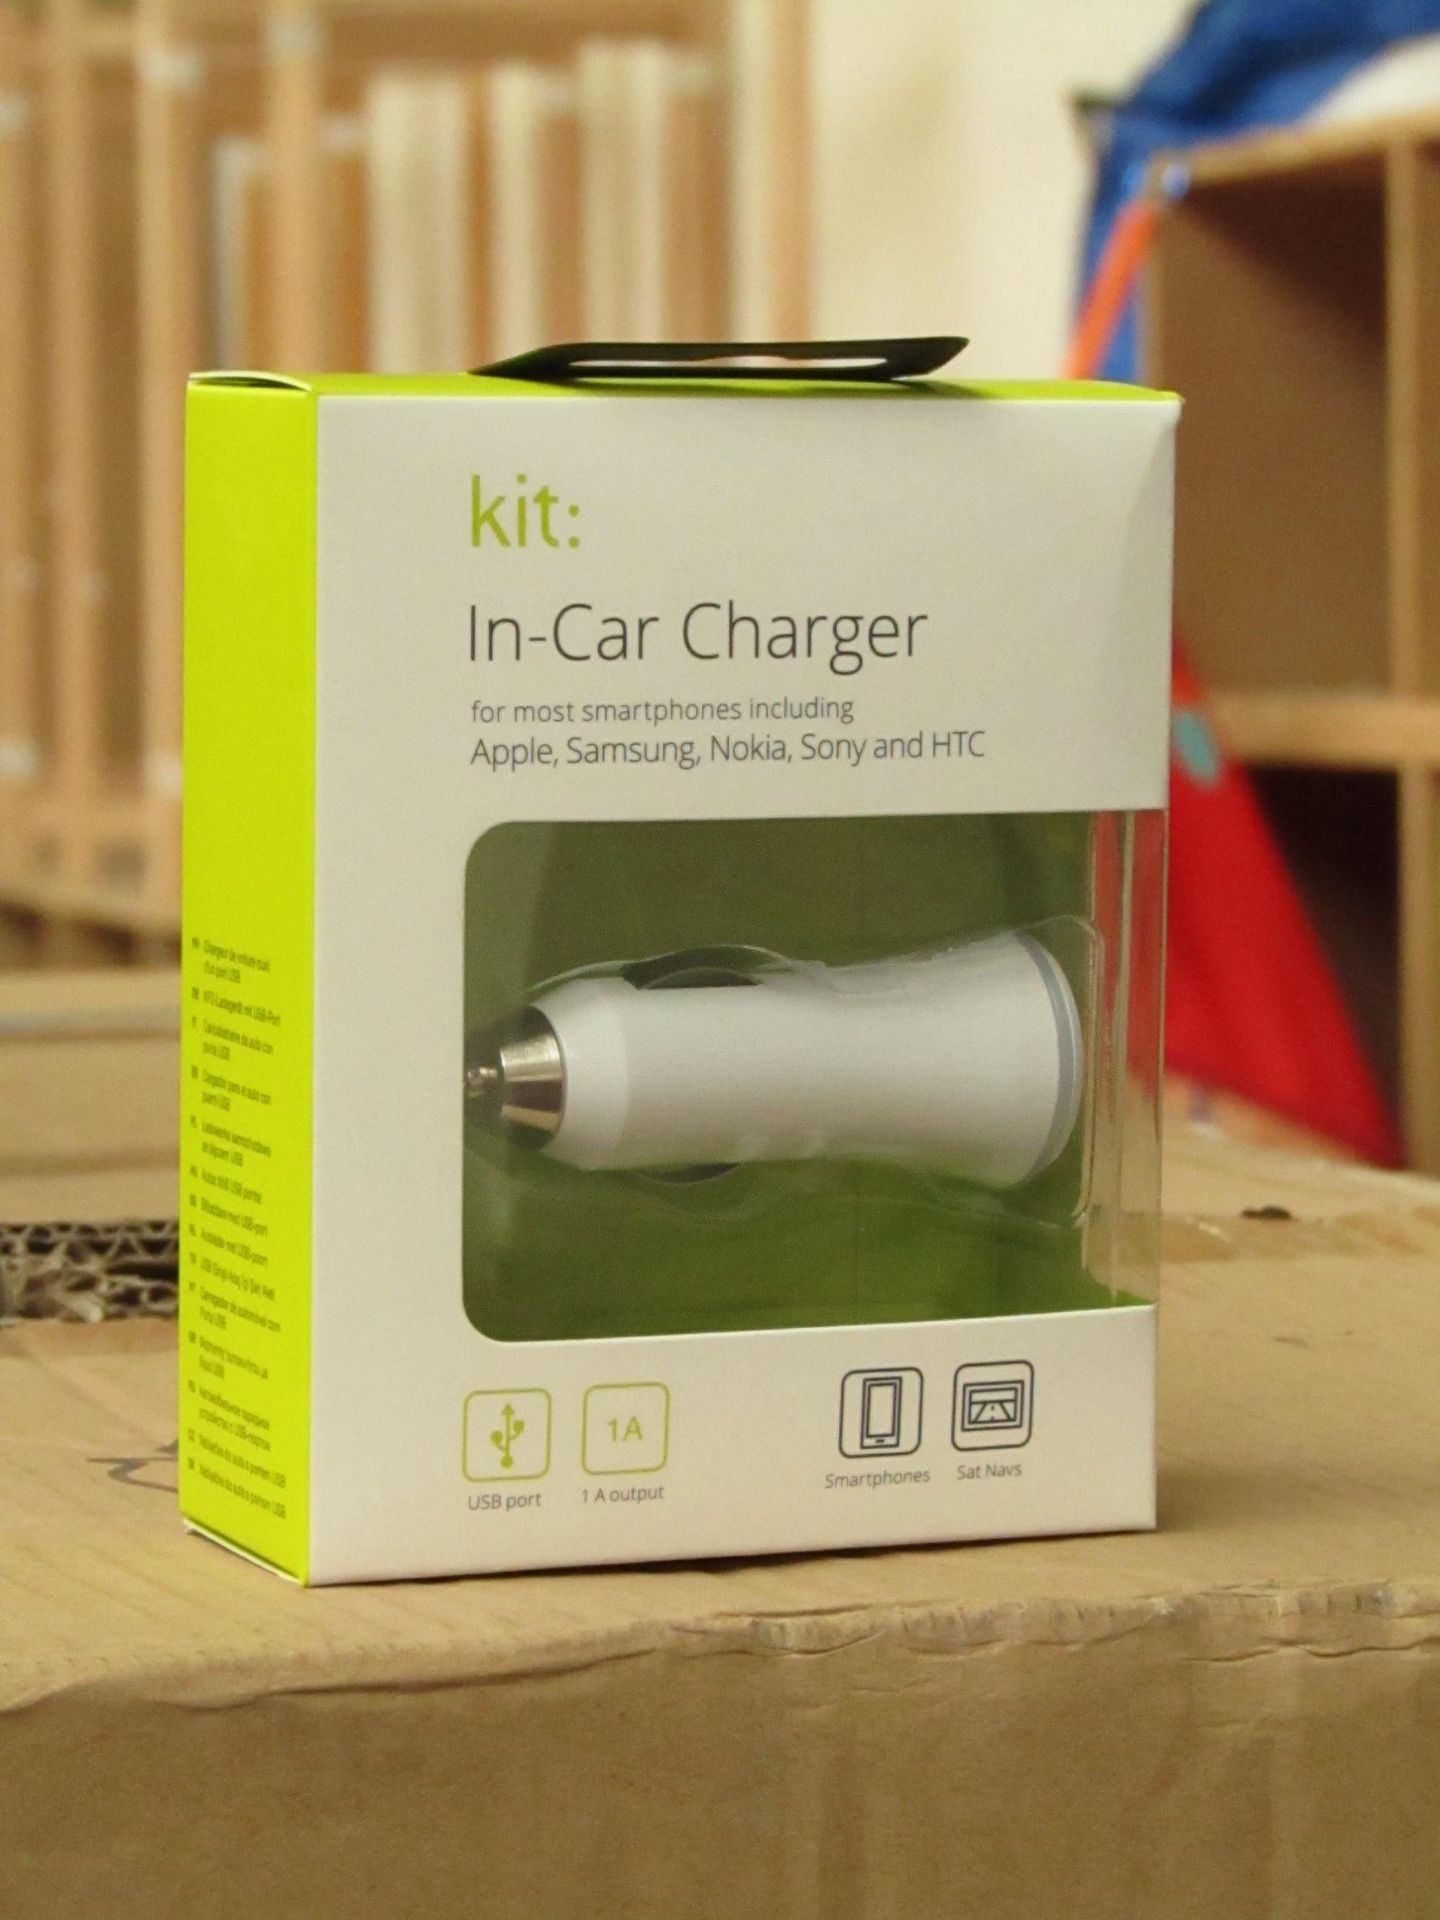 100 x Kit: In car charger for Smart  phones RRP £2.99 each total RRP £299 new & packaged